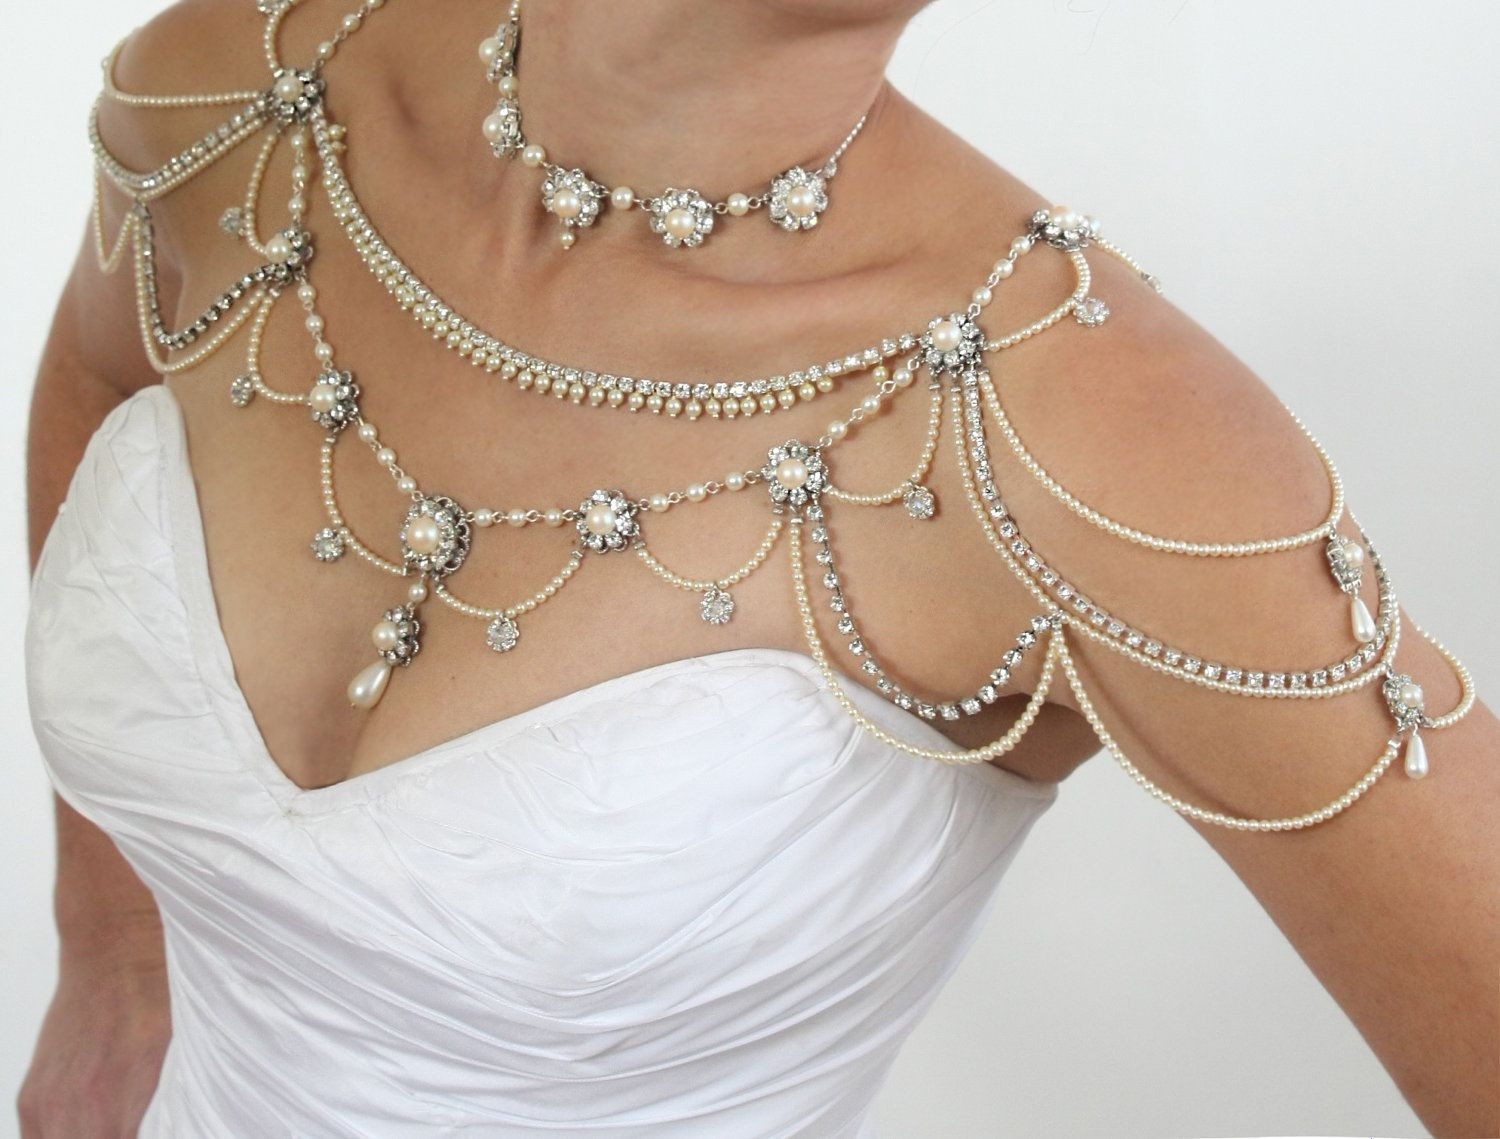 Body Jewelry Wedding
 Bridal Necklace For The SHOULDERS Victorian Style Beaded